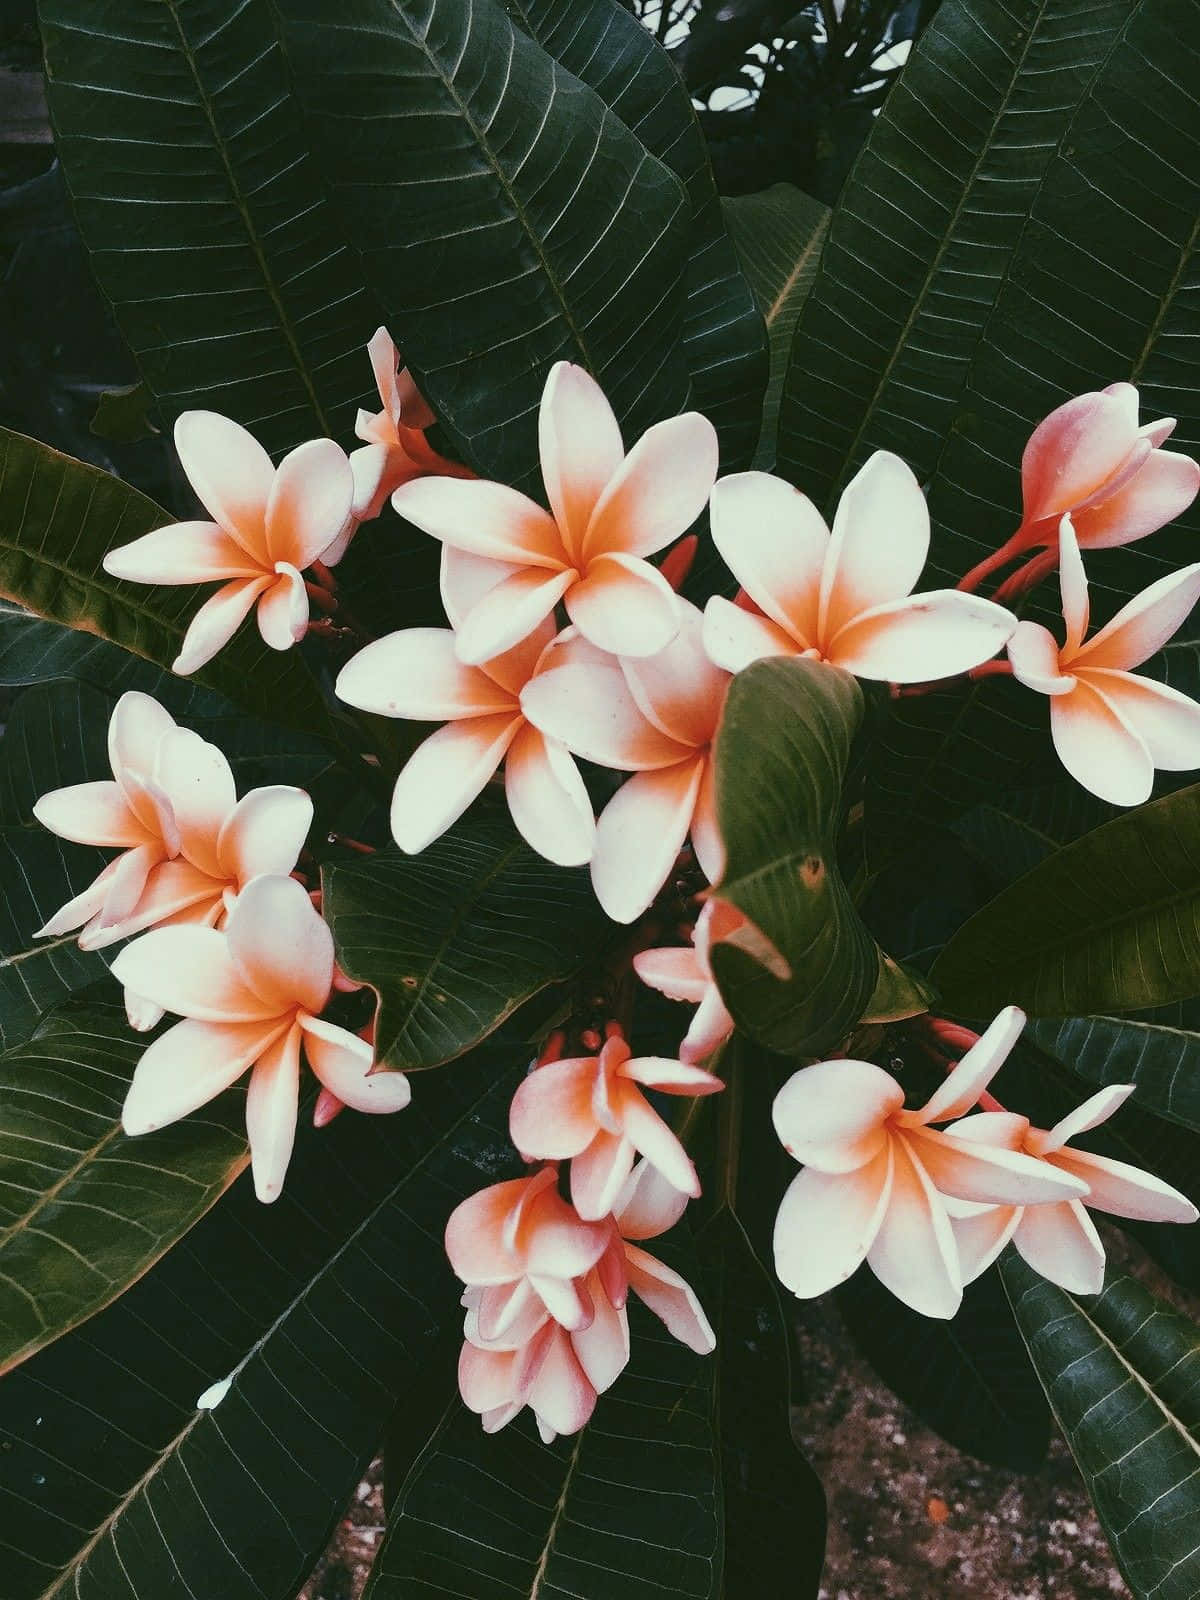 Enjoy The Natural Beauty of This Aesthetic Flower